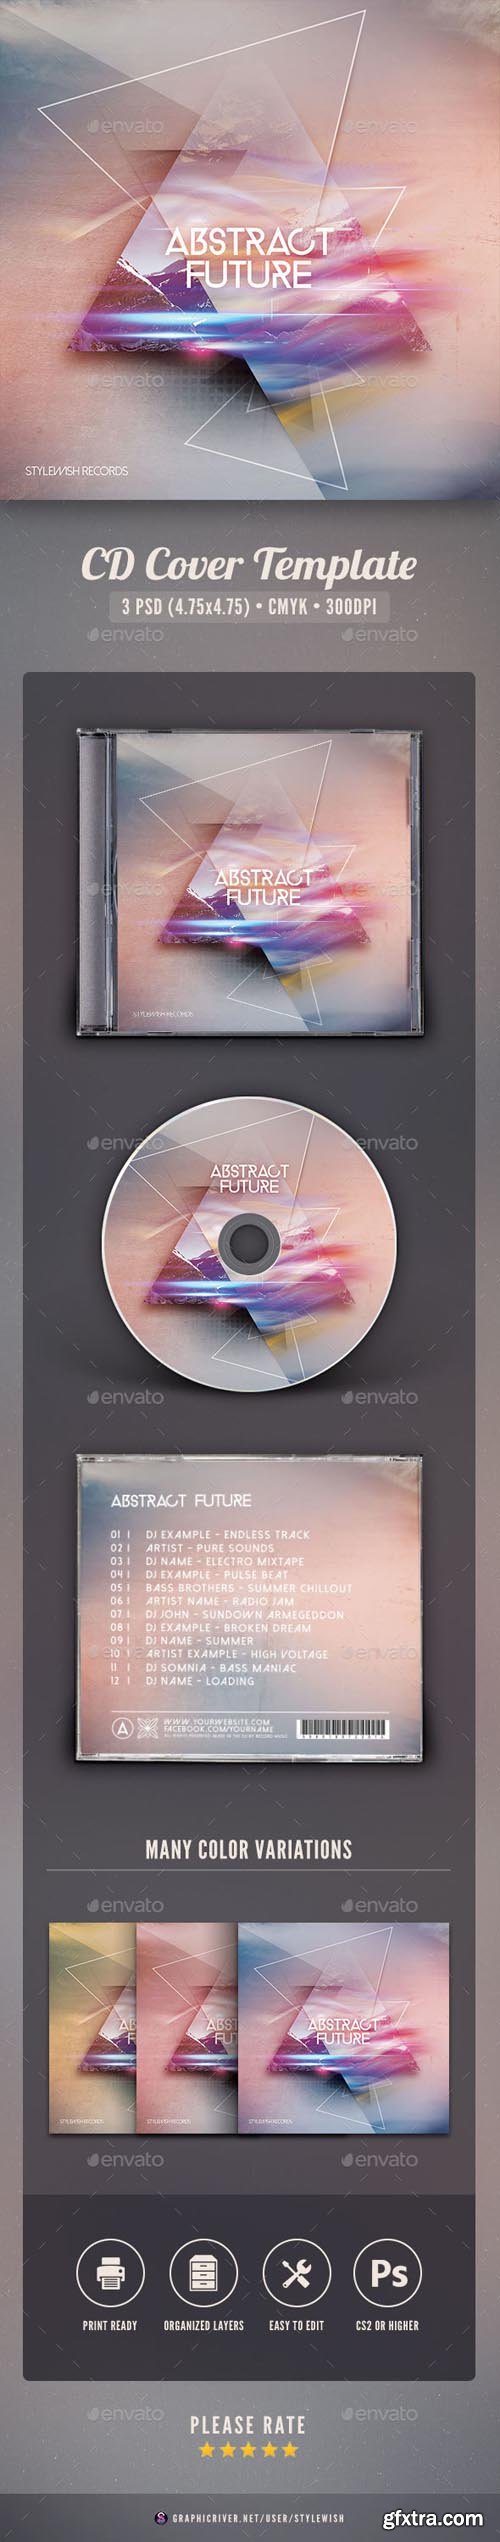 GR - Abstract Future CD Cover Artwork 16150363